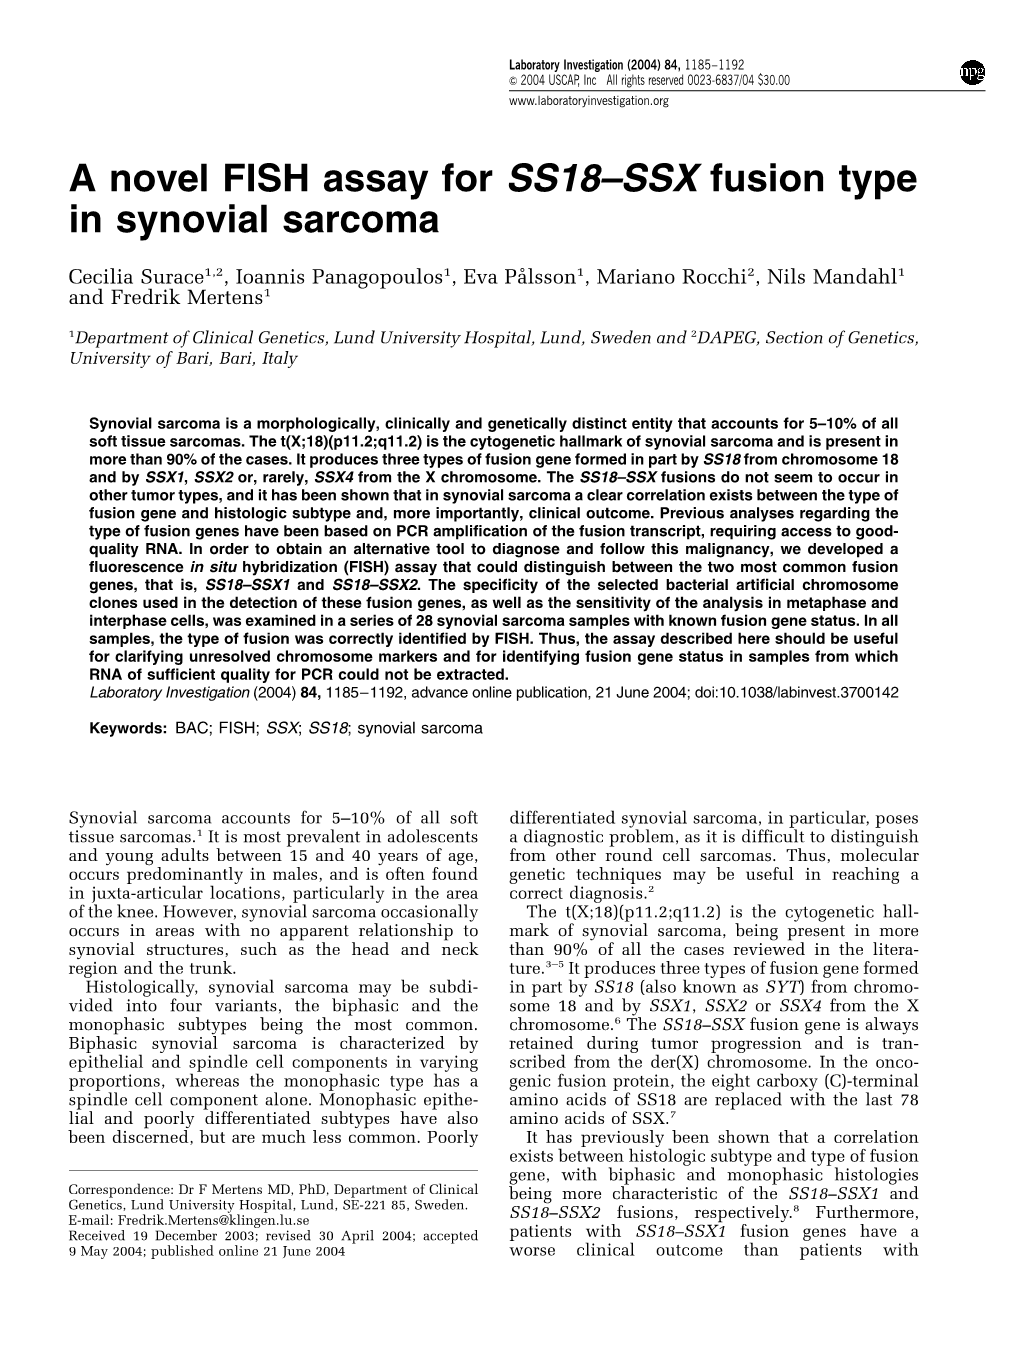 A Novel FISH Assay for SS18–SSX Fusion Type in Synovial Sarcoma